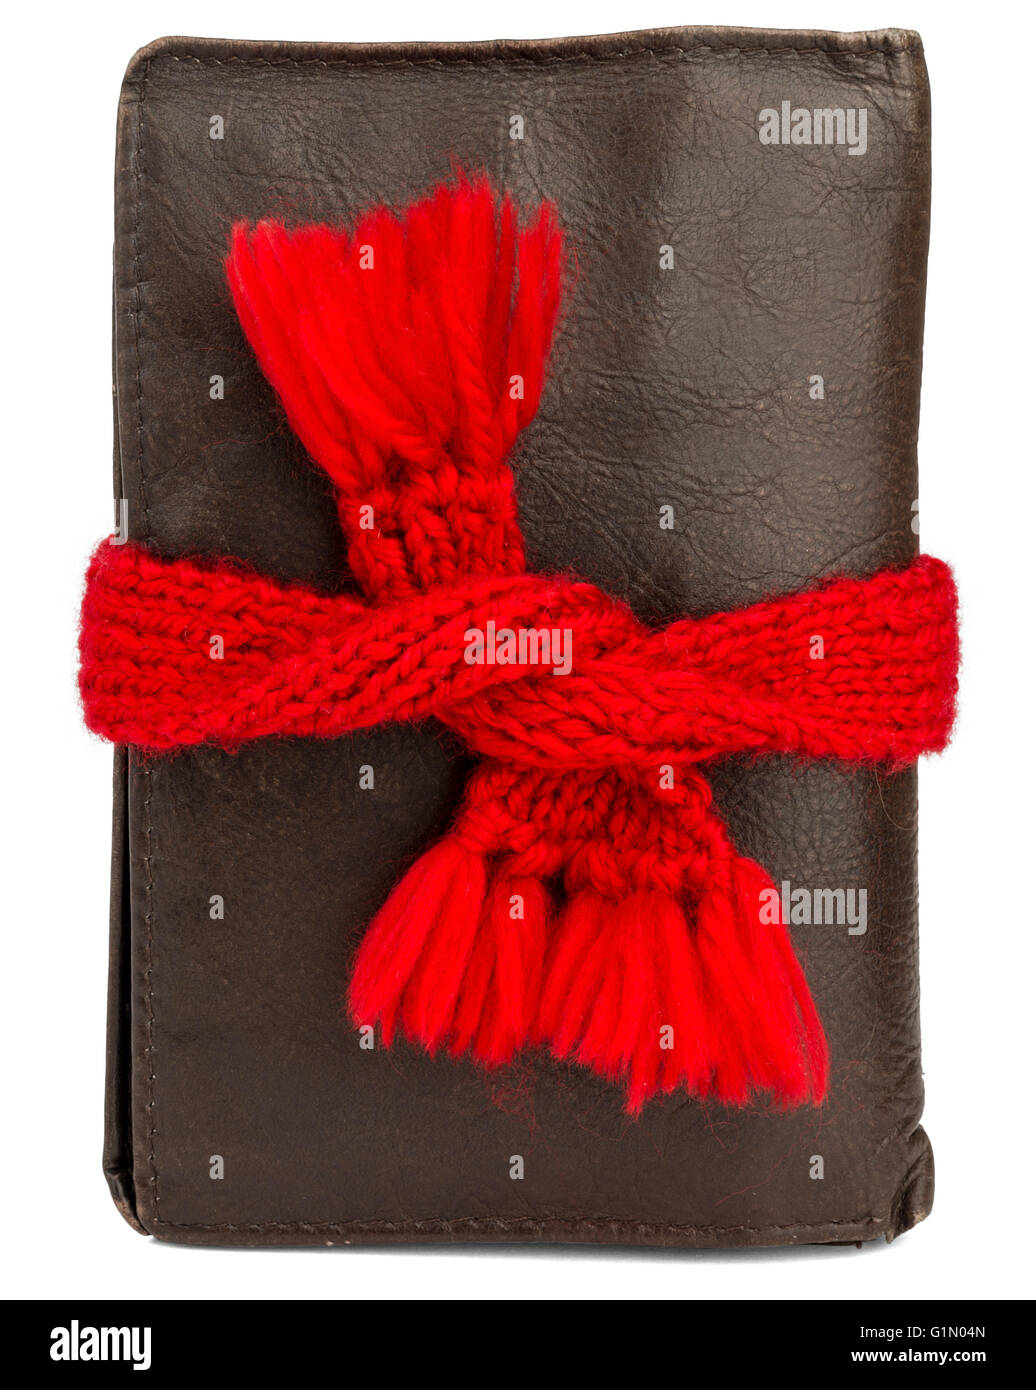 Wallet wearing red scarf Stock Photo